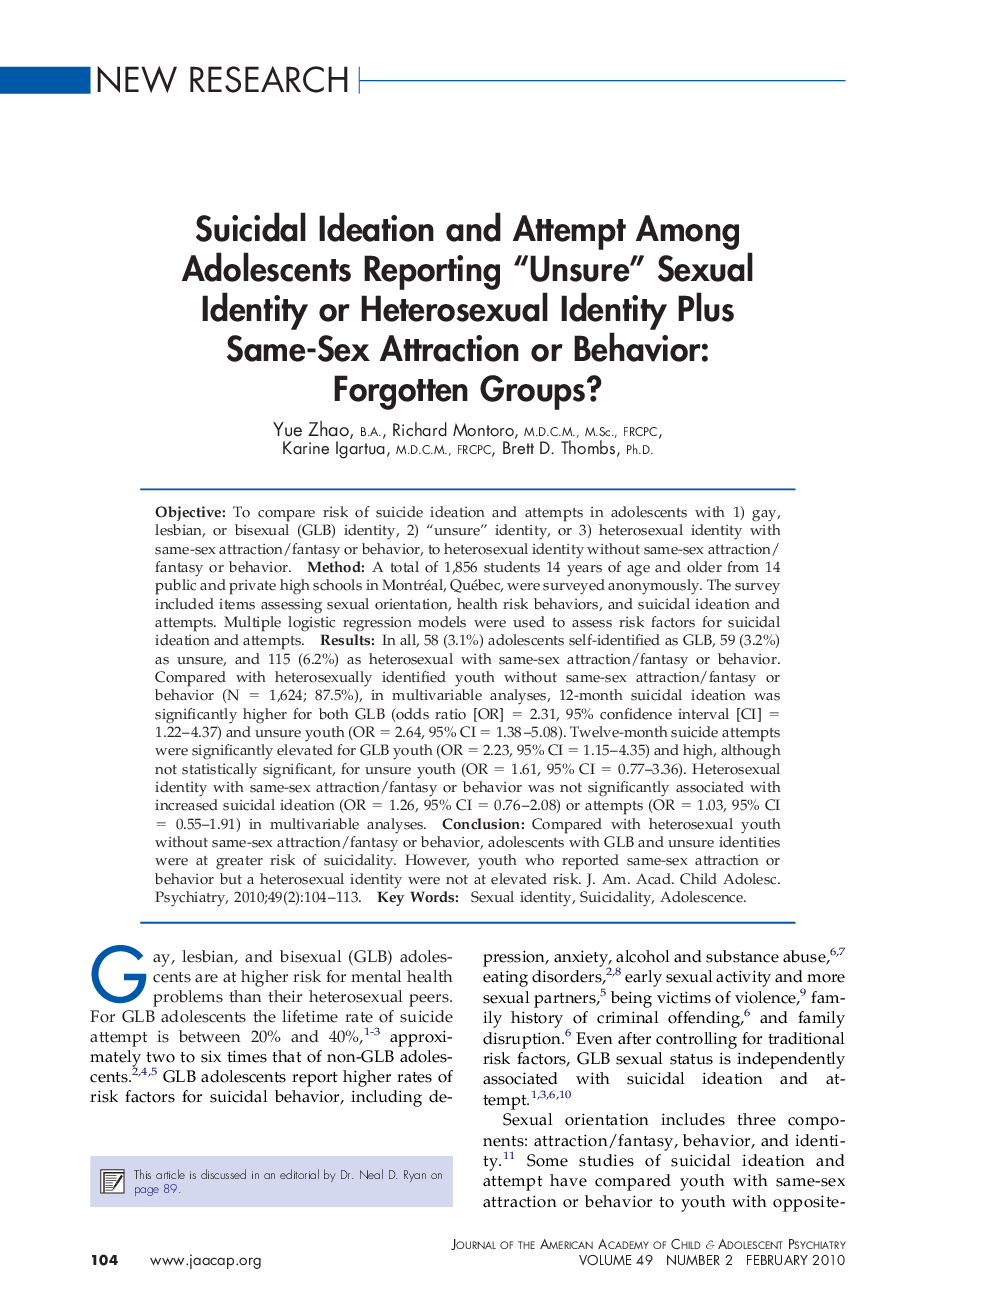 Suicidal Ideation and Attempt Among Adolescents Reporting “Unsure” Sexual Identity or Heterosexual Identity Plus Same-Sex Attraction or Behavior: Forgotten Groups? 